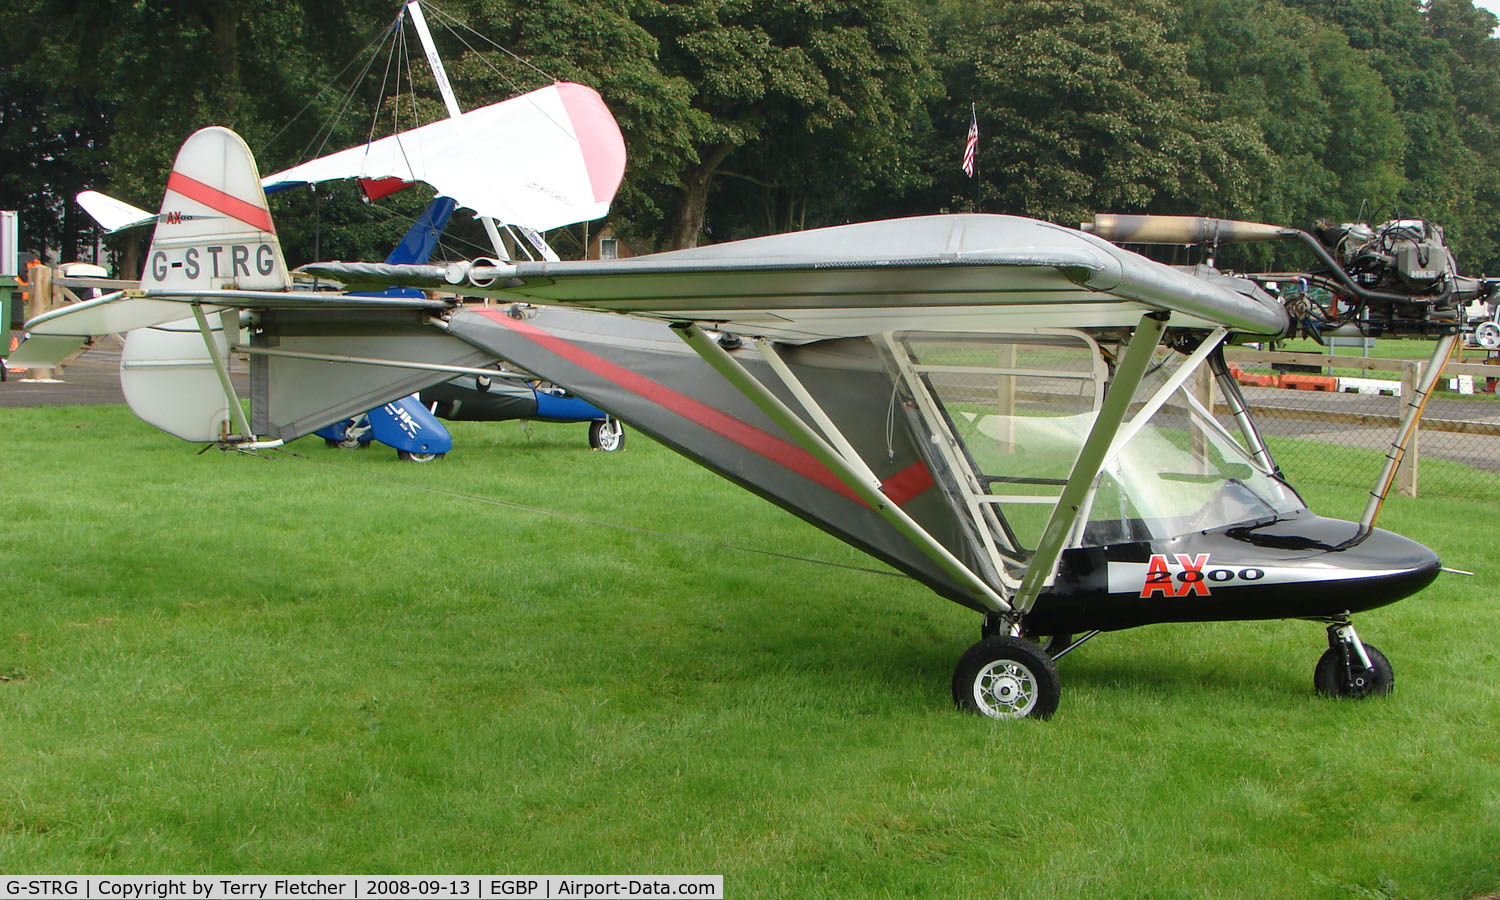 G-STRG, 2001 Cyclone AX2000 C/N 7837, Microlight on display at Kemble 2008 - Saturday - Battle of Britain Open Day